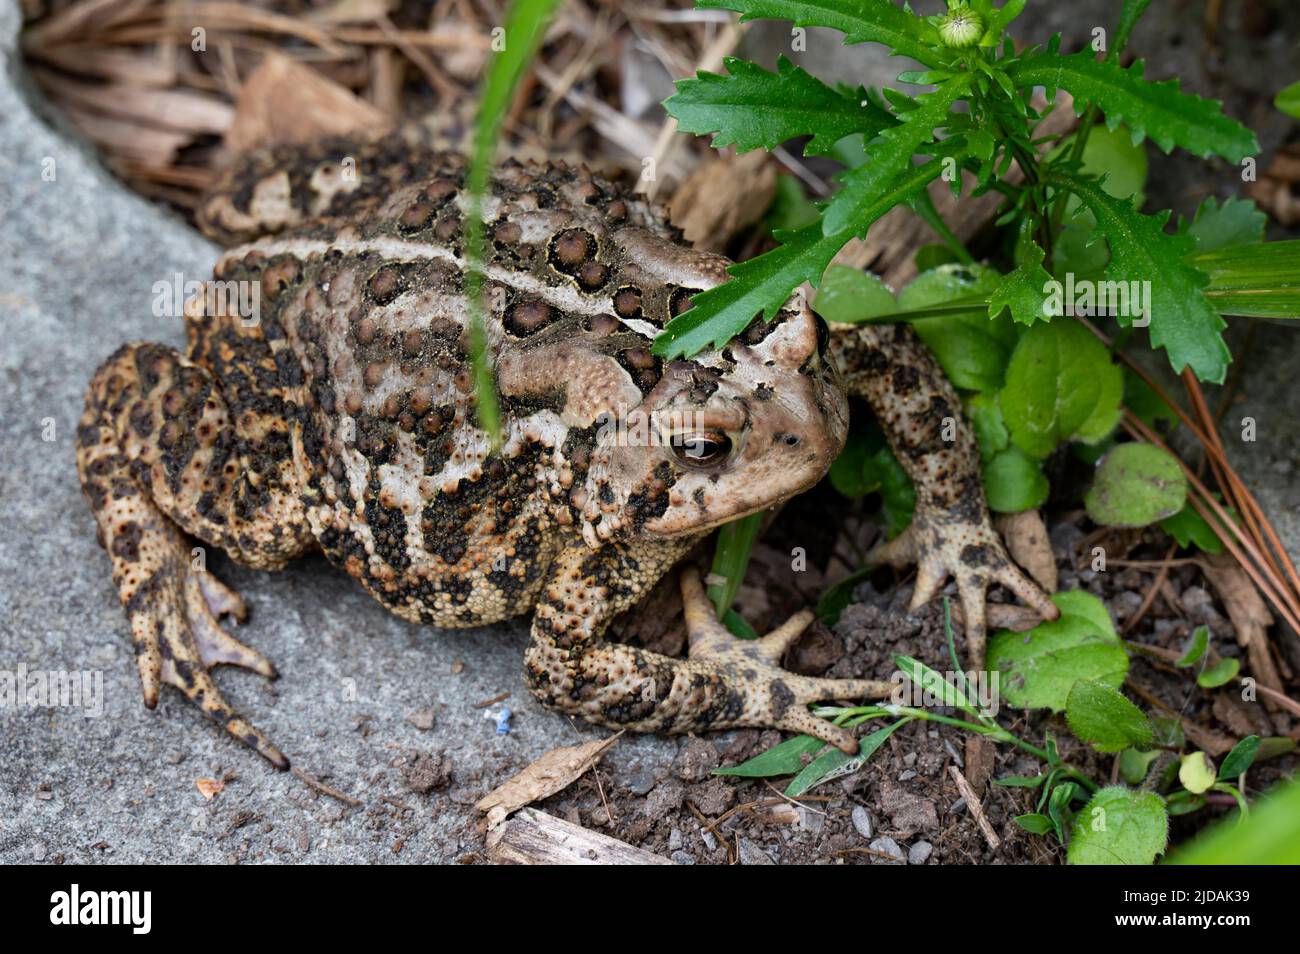 An Eastern American toad, Anaxyrus americanus, sitting on a rock next to a garden in the Adirondack Mountains, NY USA Stock Photo